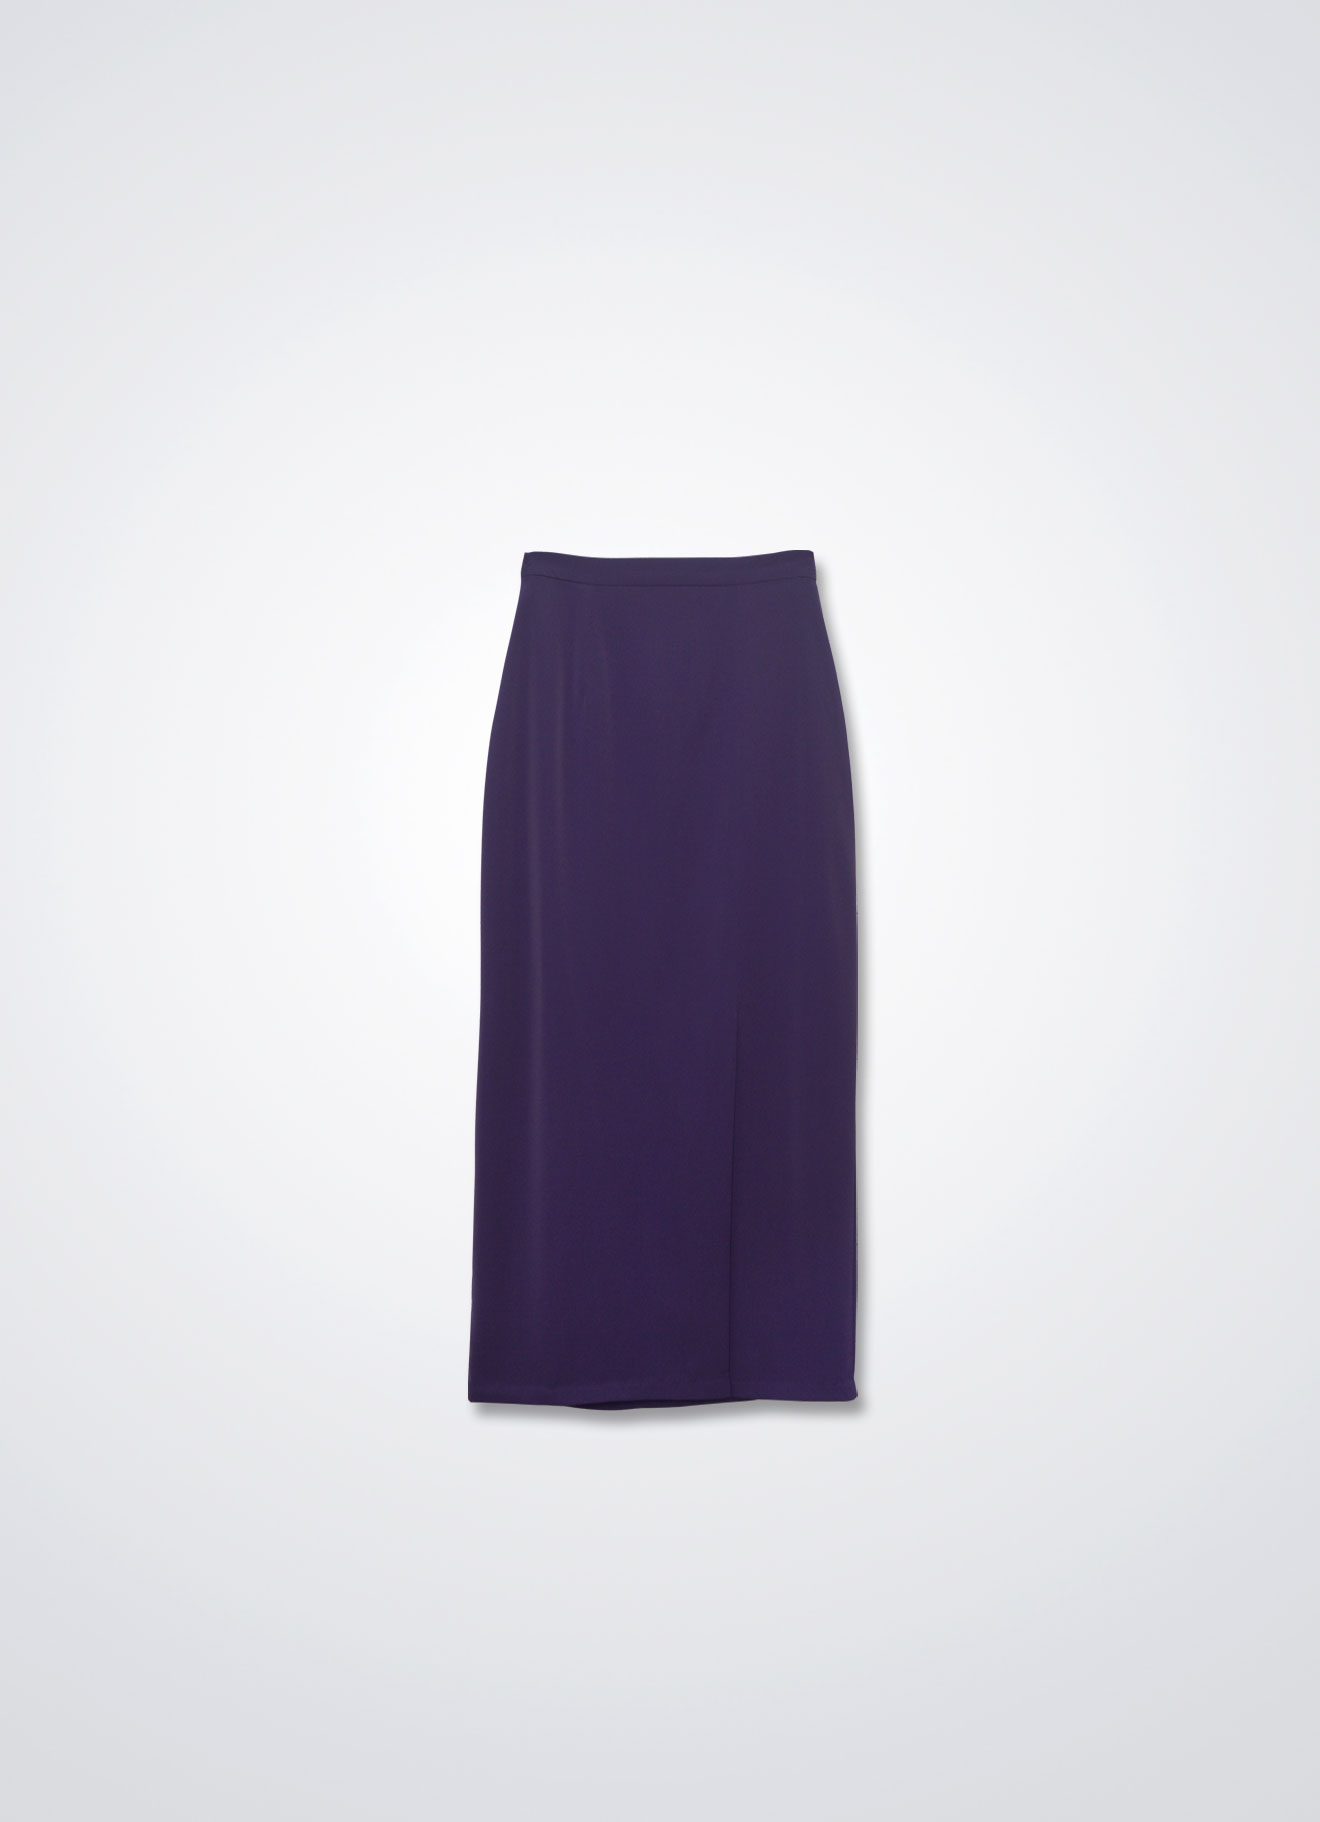 Loganberry by Skirt